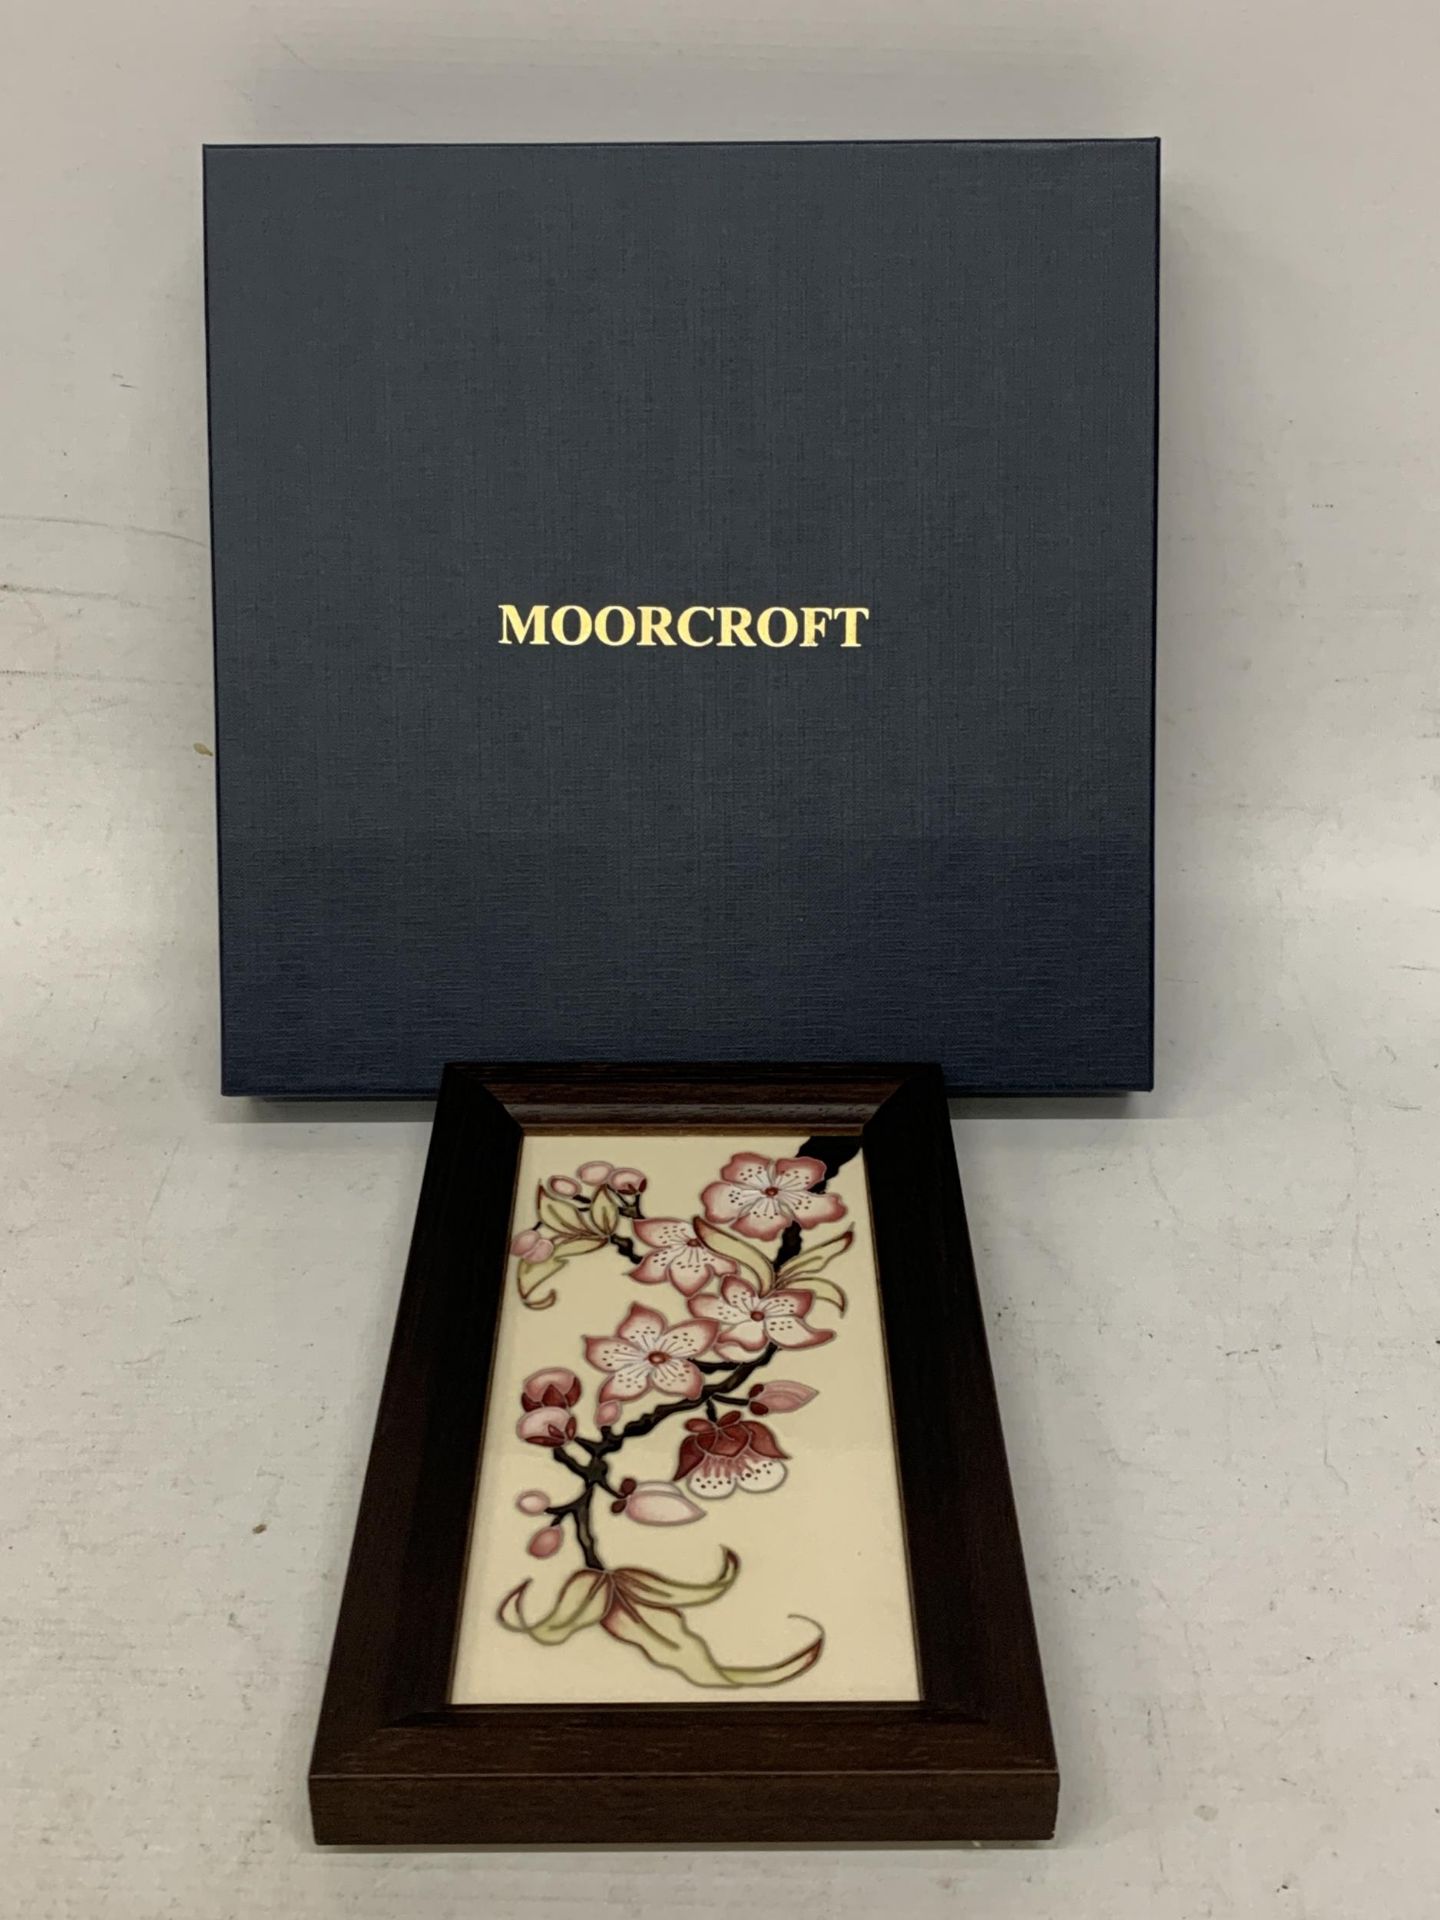 A BOXED MOORCROFT FRAMED PLAQUE "BUTTERWORTH" LIMITED EDITION 2/75